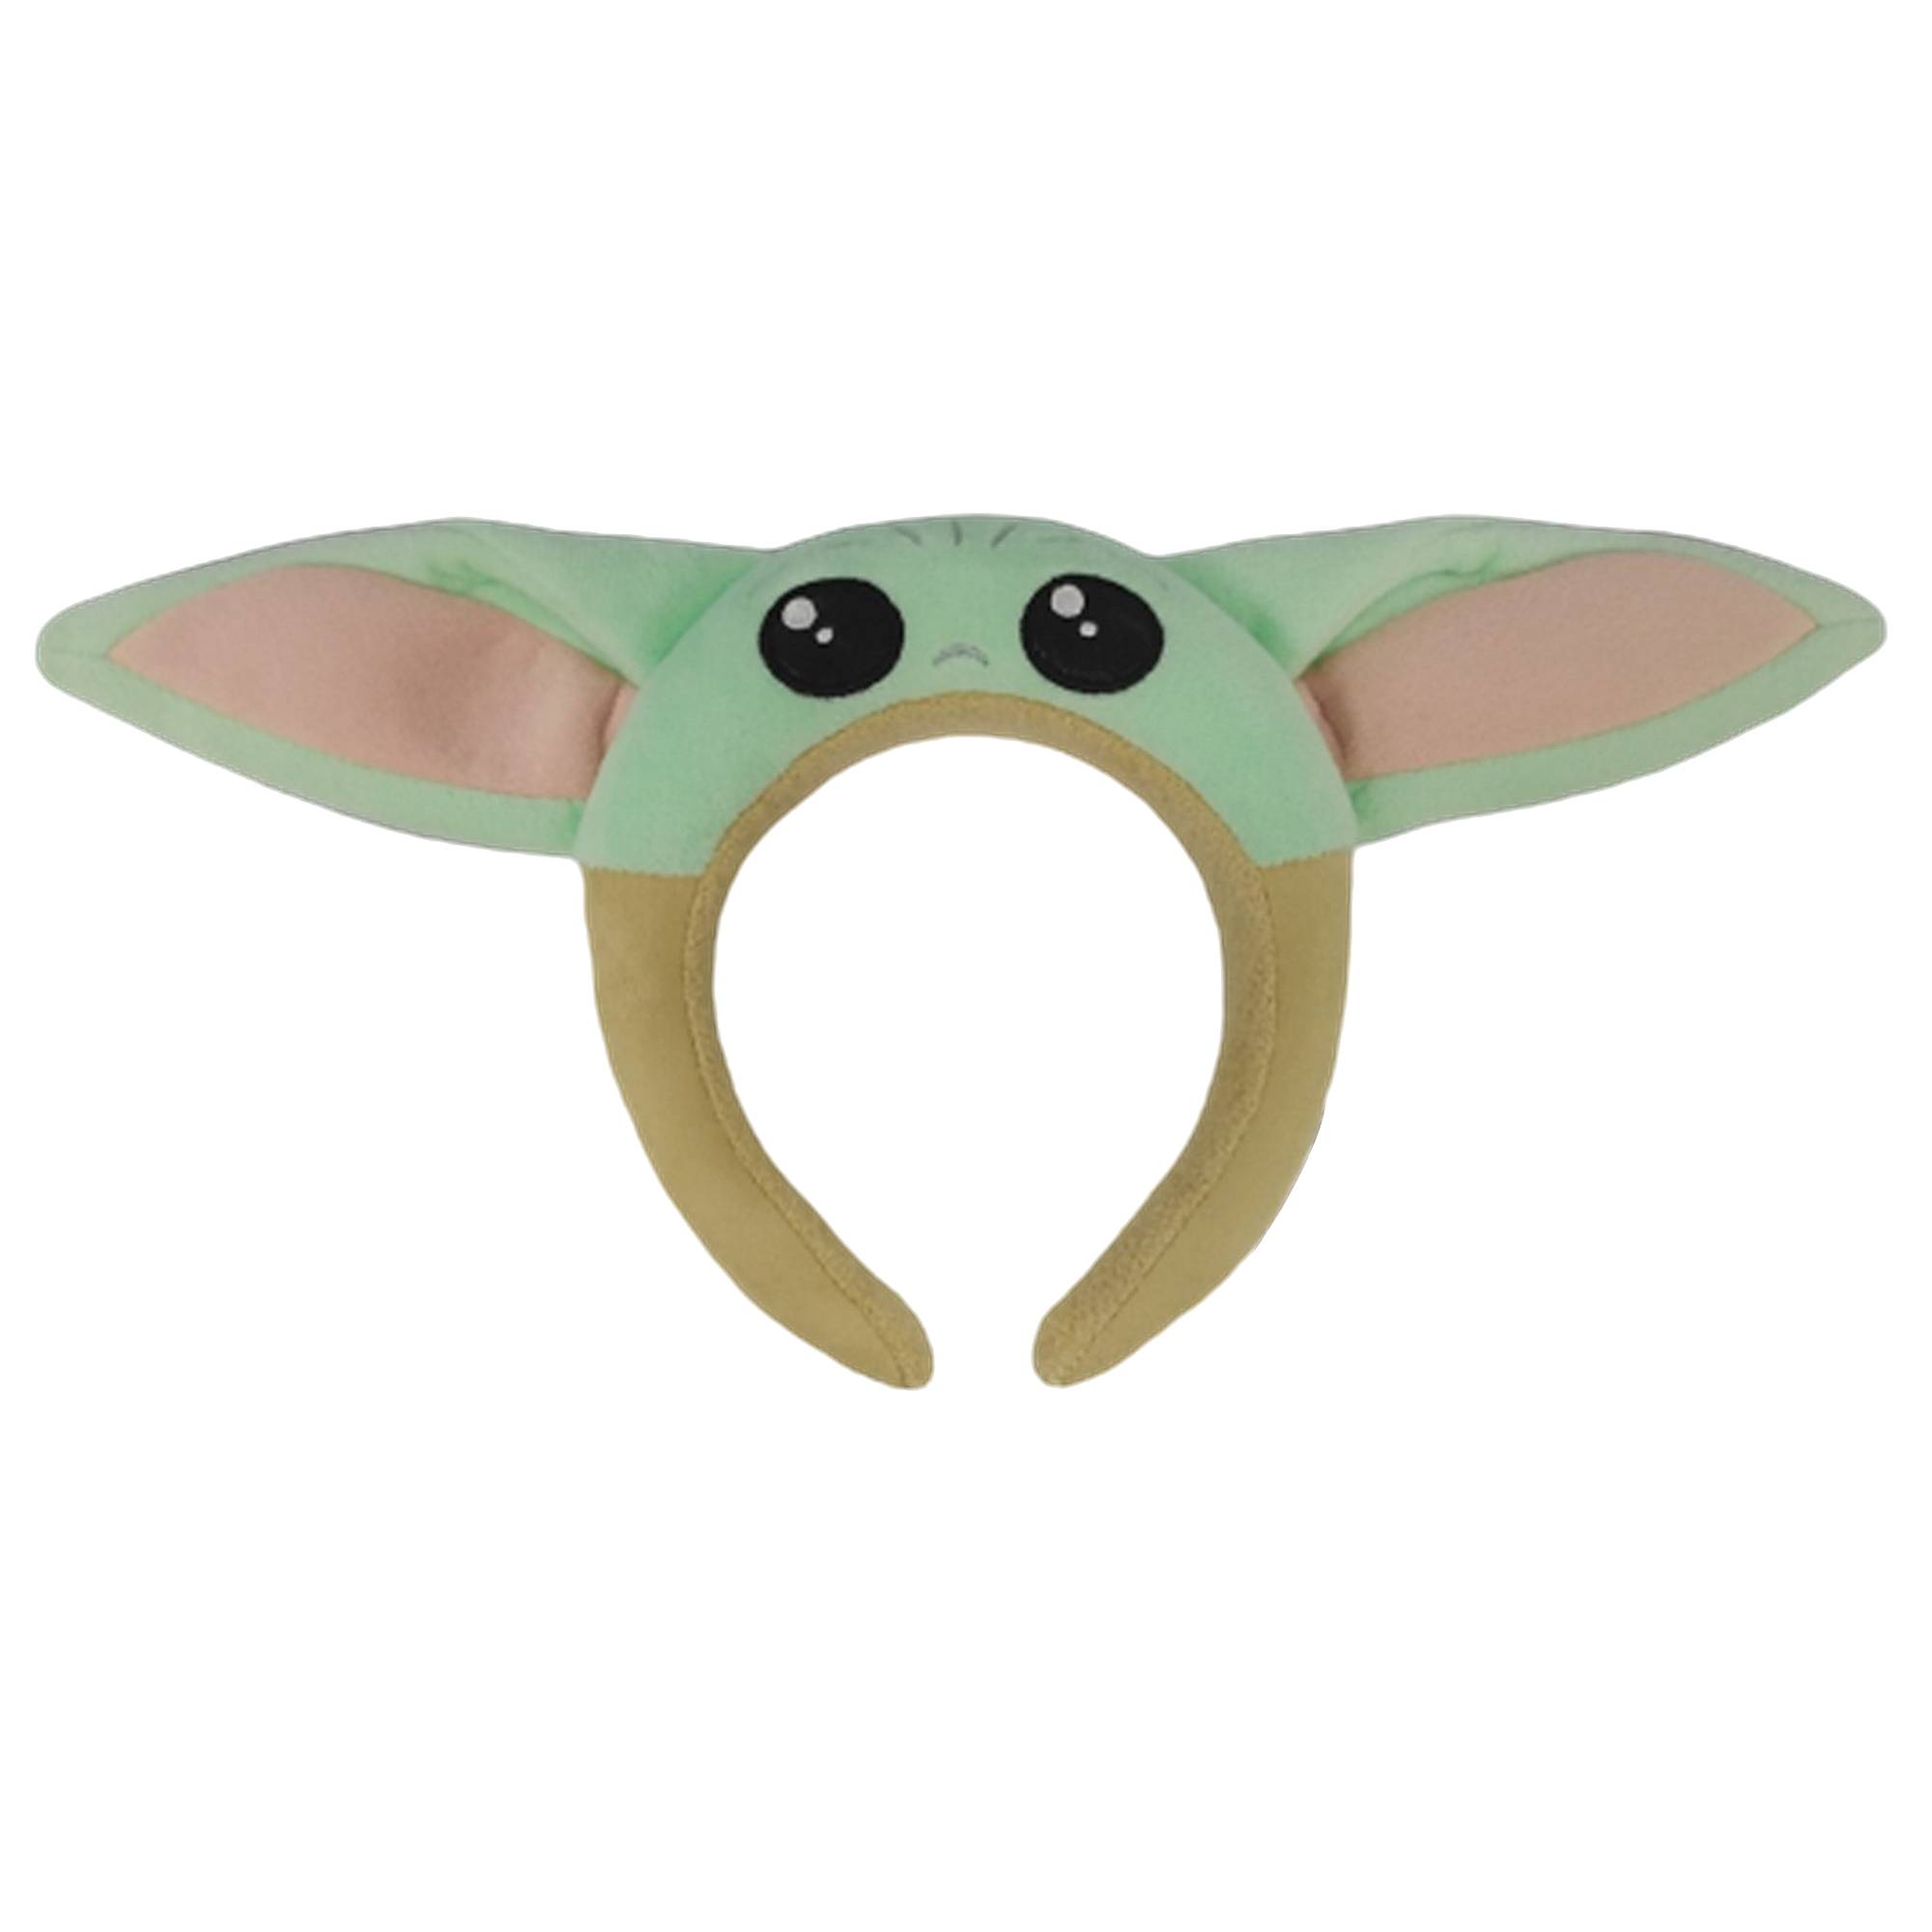 The Child Ear Headband for Adults – Star Wars -  The Mandalorian image